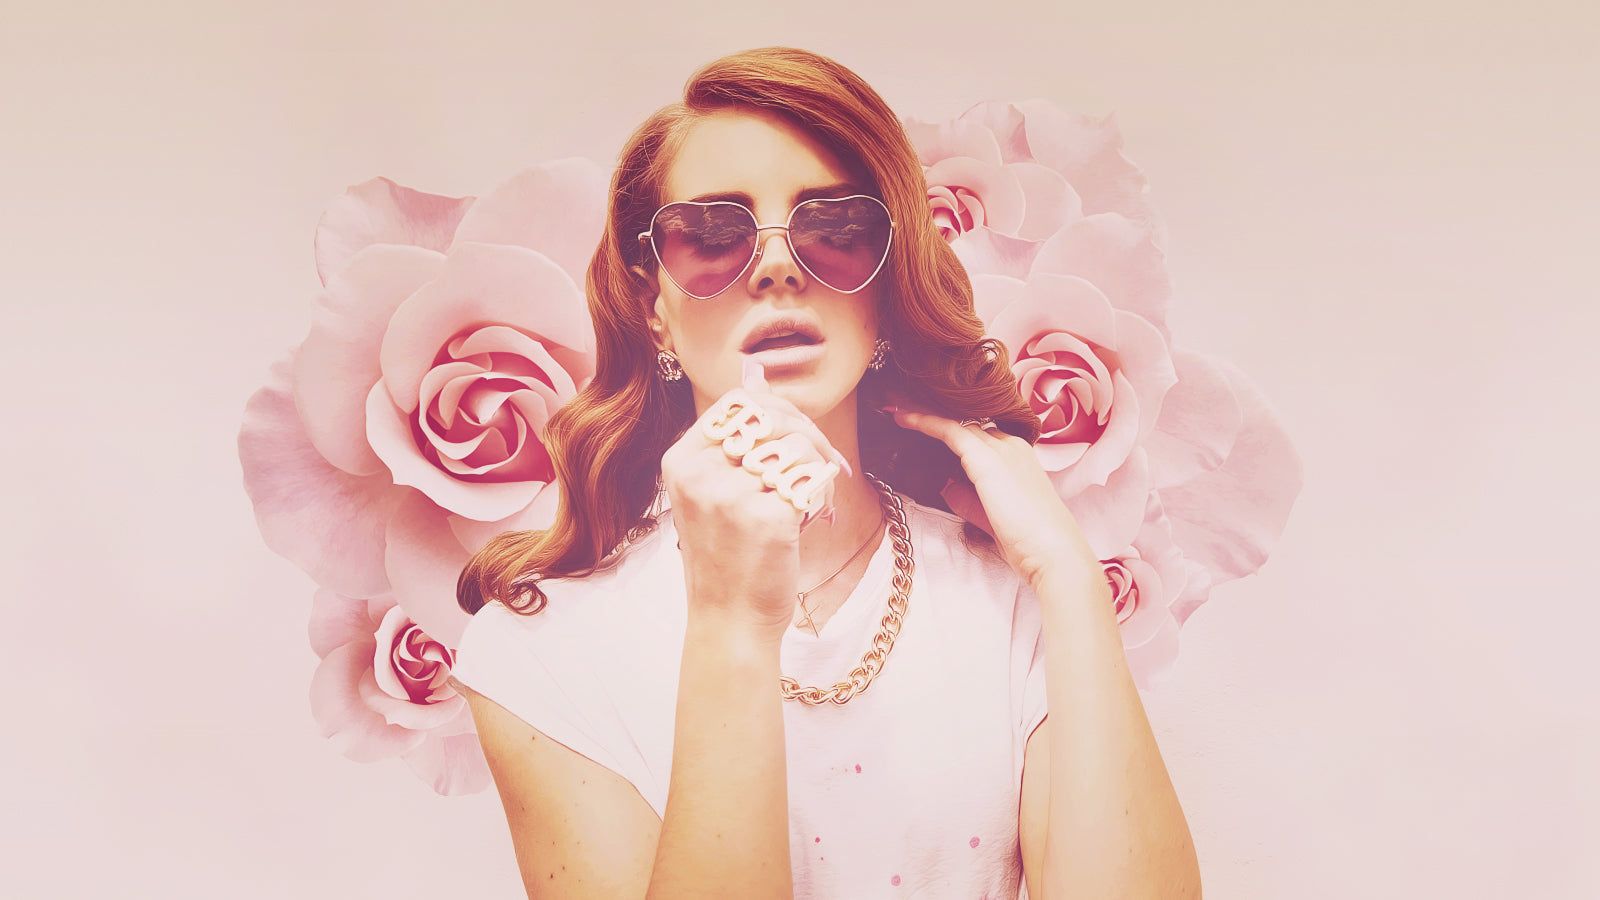 A woman with sunglasses and flowers around her - Lana Del Rey